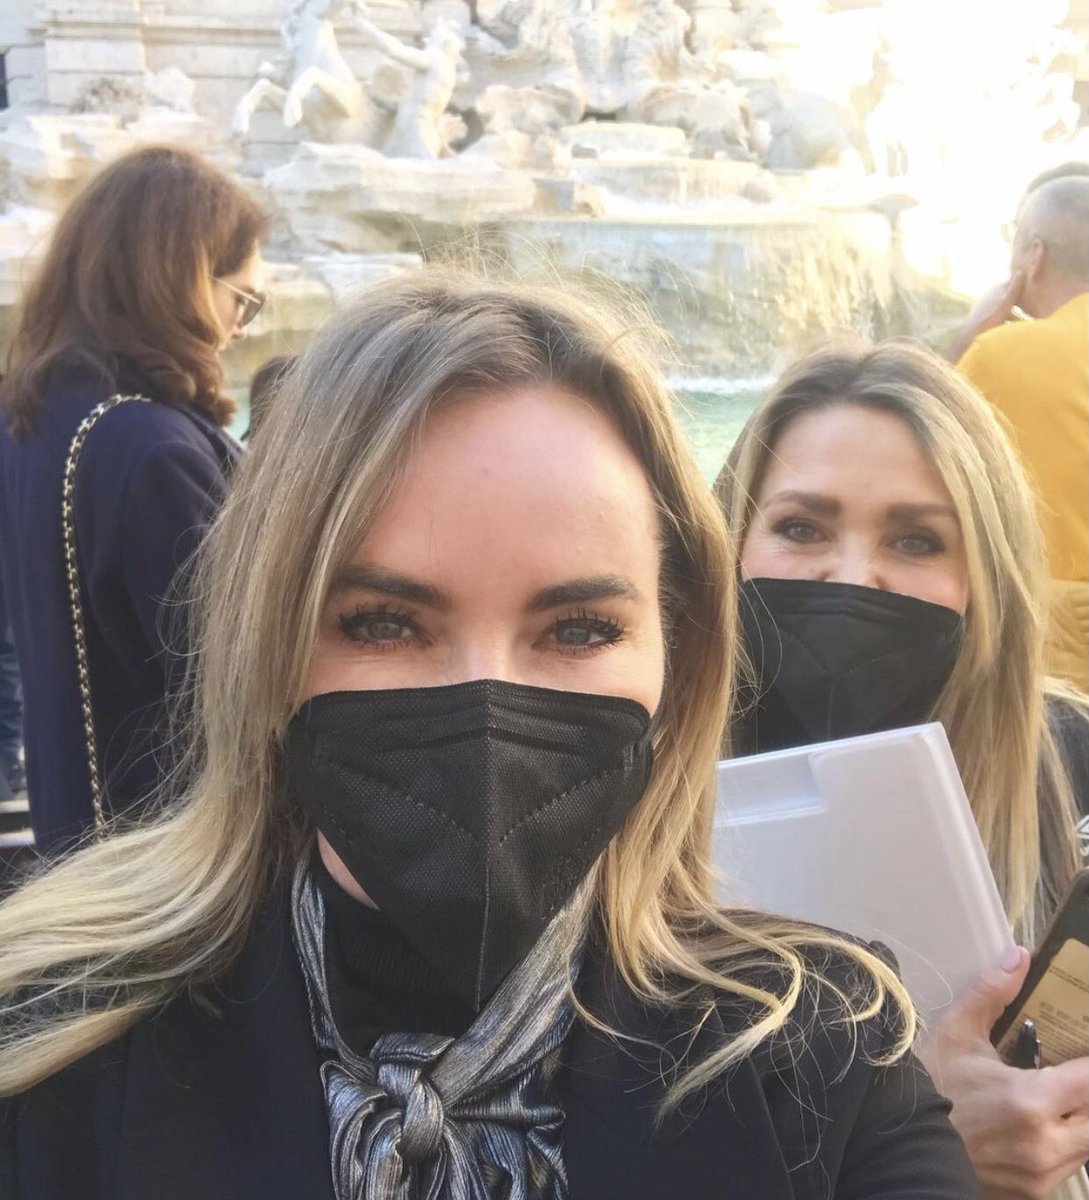 Been a busy day getting ready  😅 we’ve seen so many beautiful things and learnt that we have no sense of direction 😂 god help our guests  😅 #rome #spanishsteps🇮🇹 #trevifountain #pantheonrome #aprilandbev